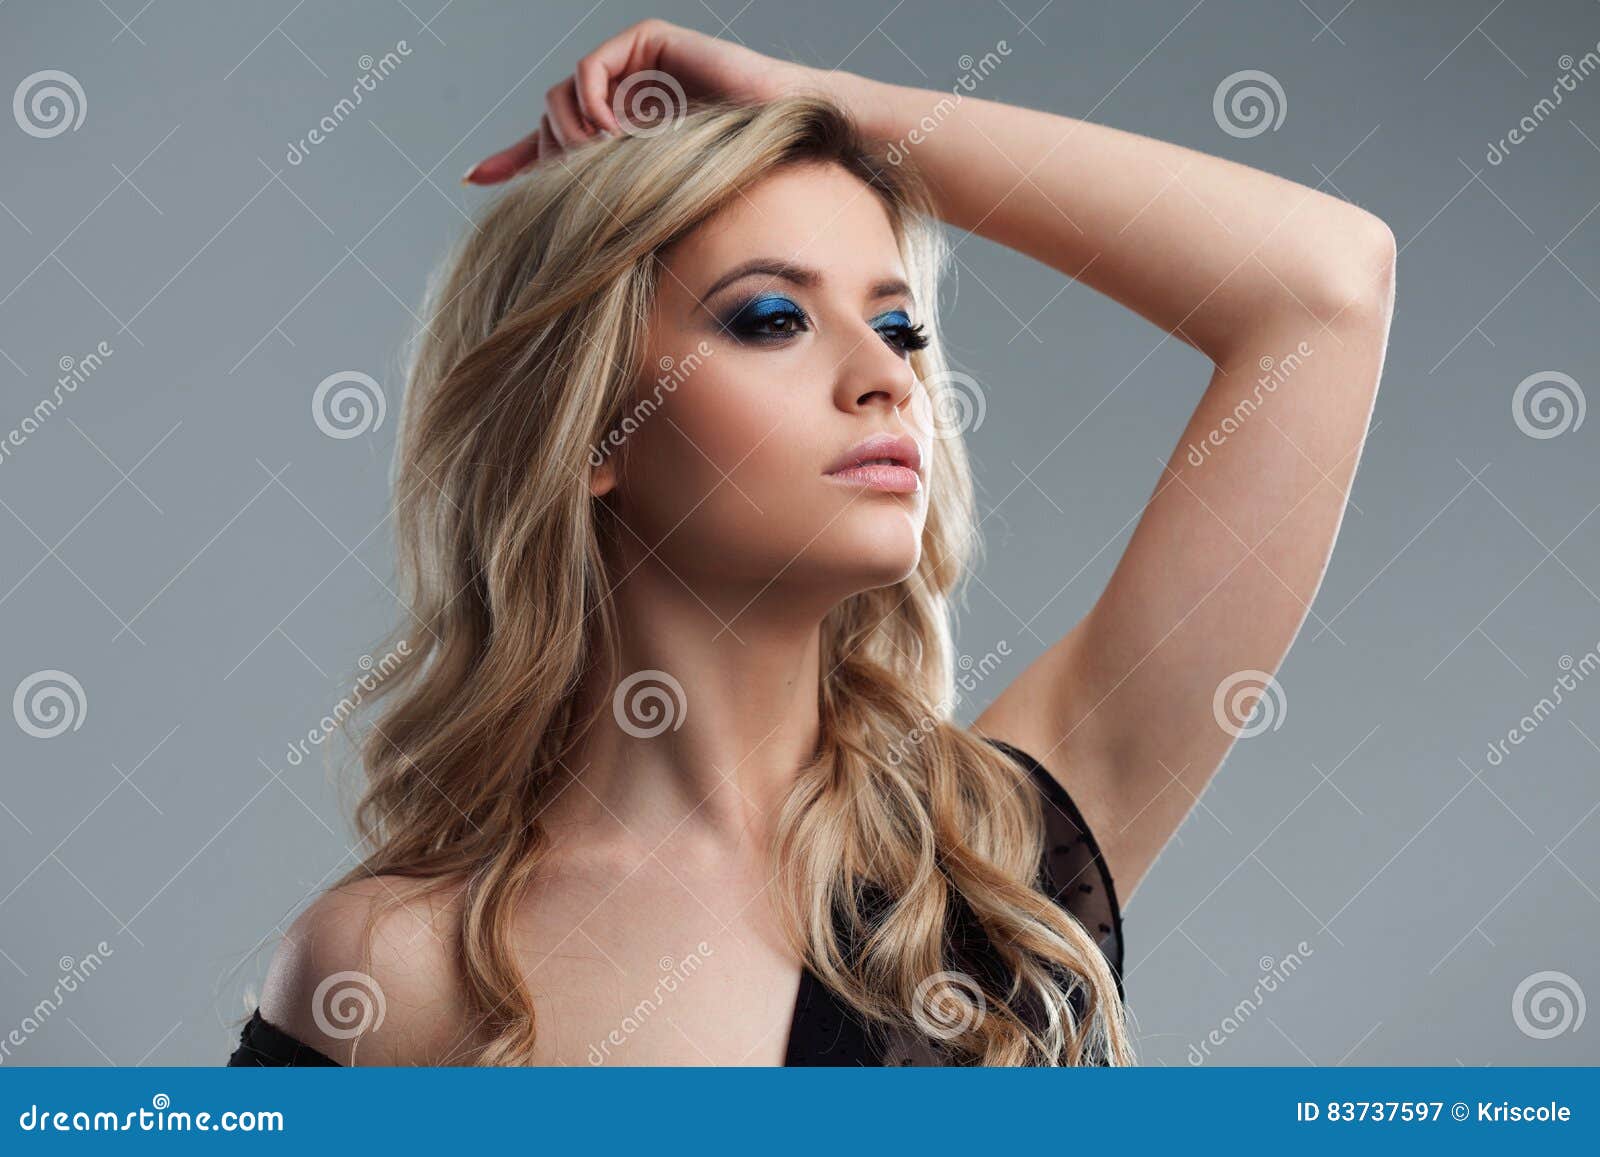 Blonde Model with Wavy Hair - wide 1